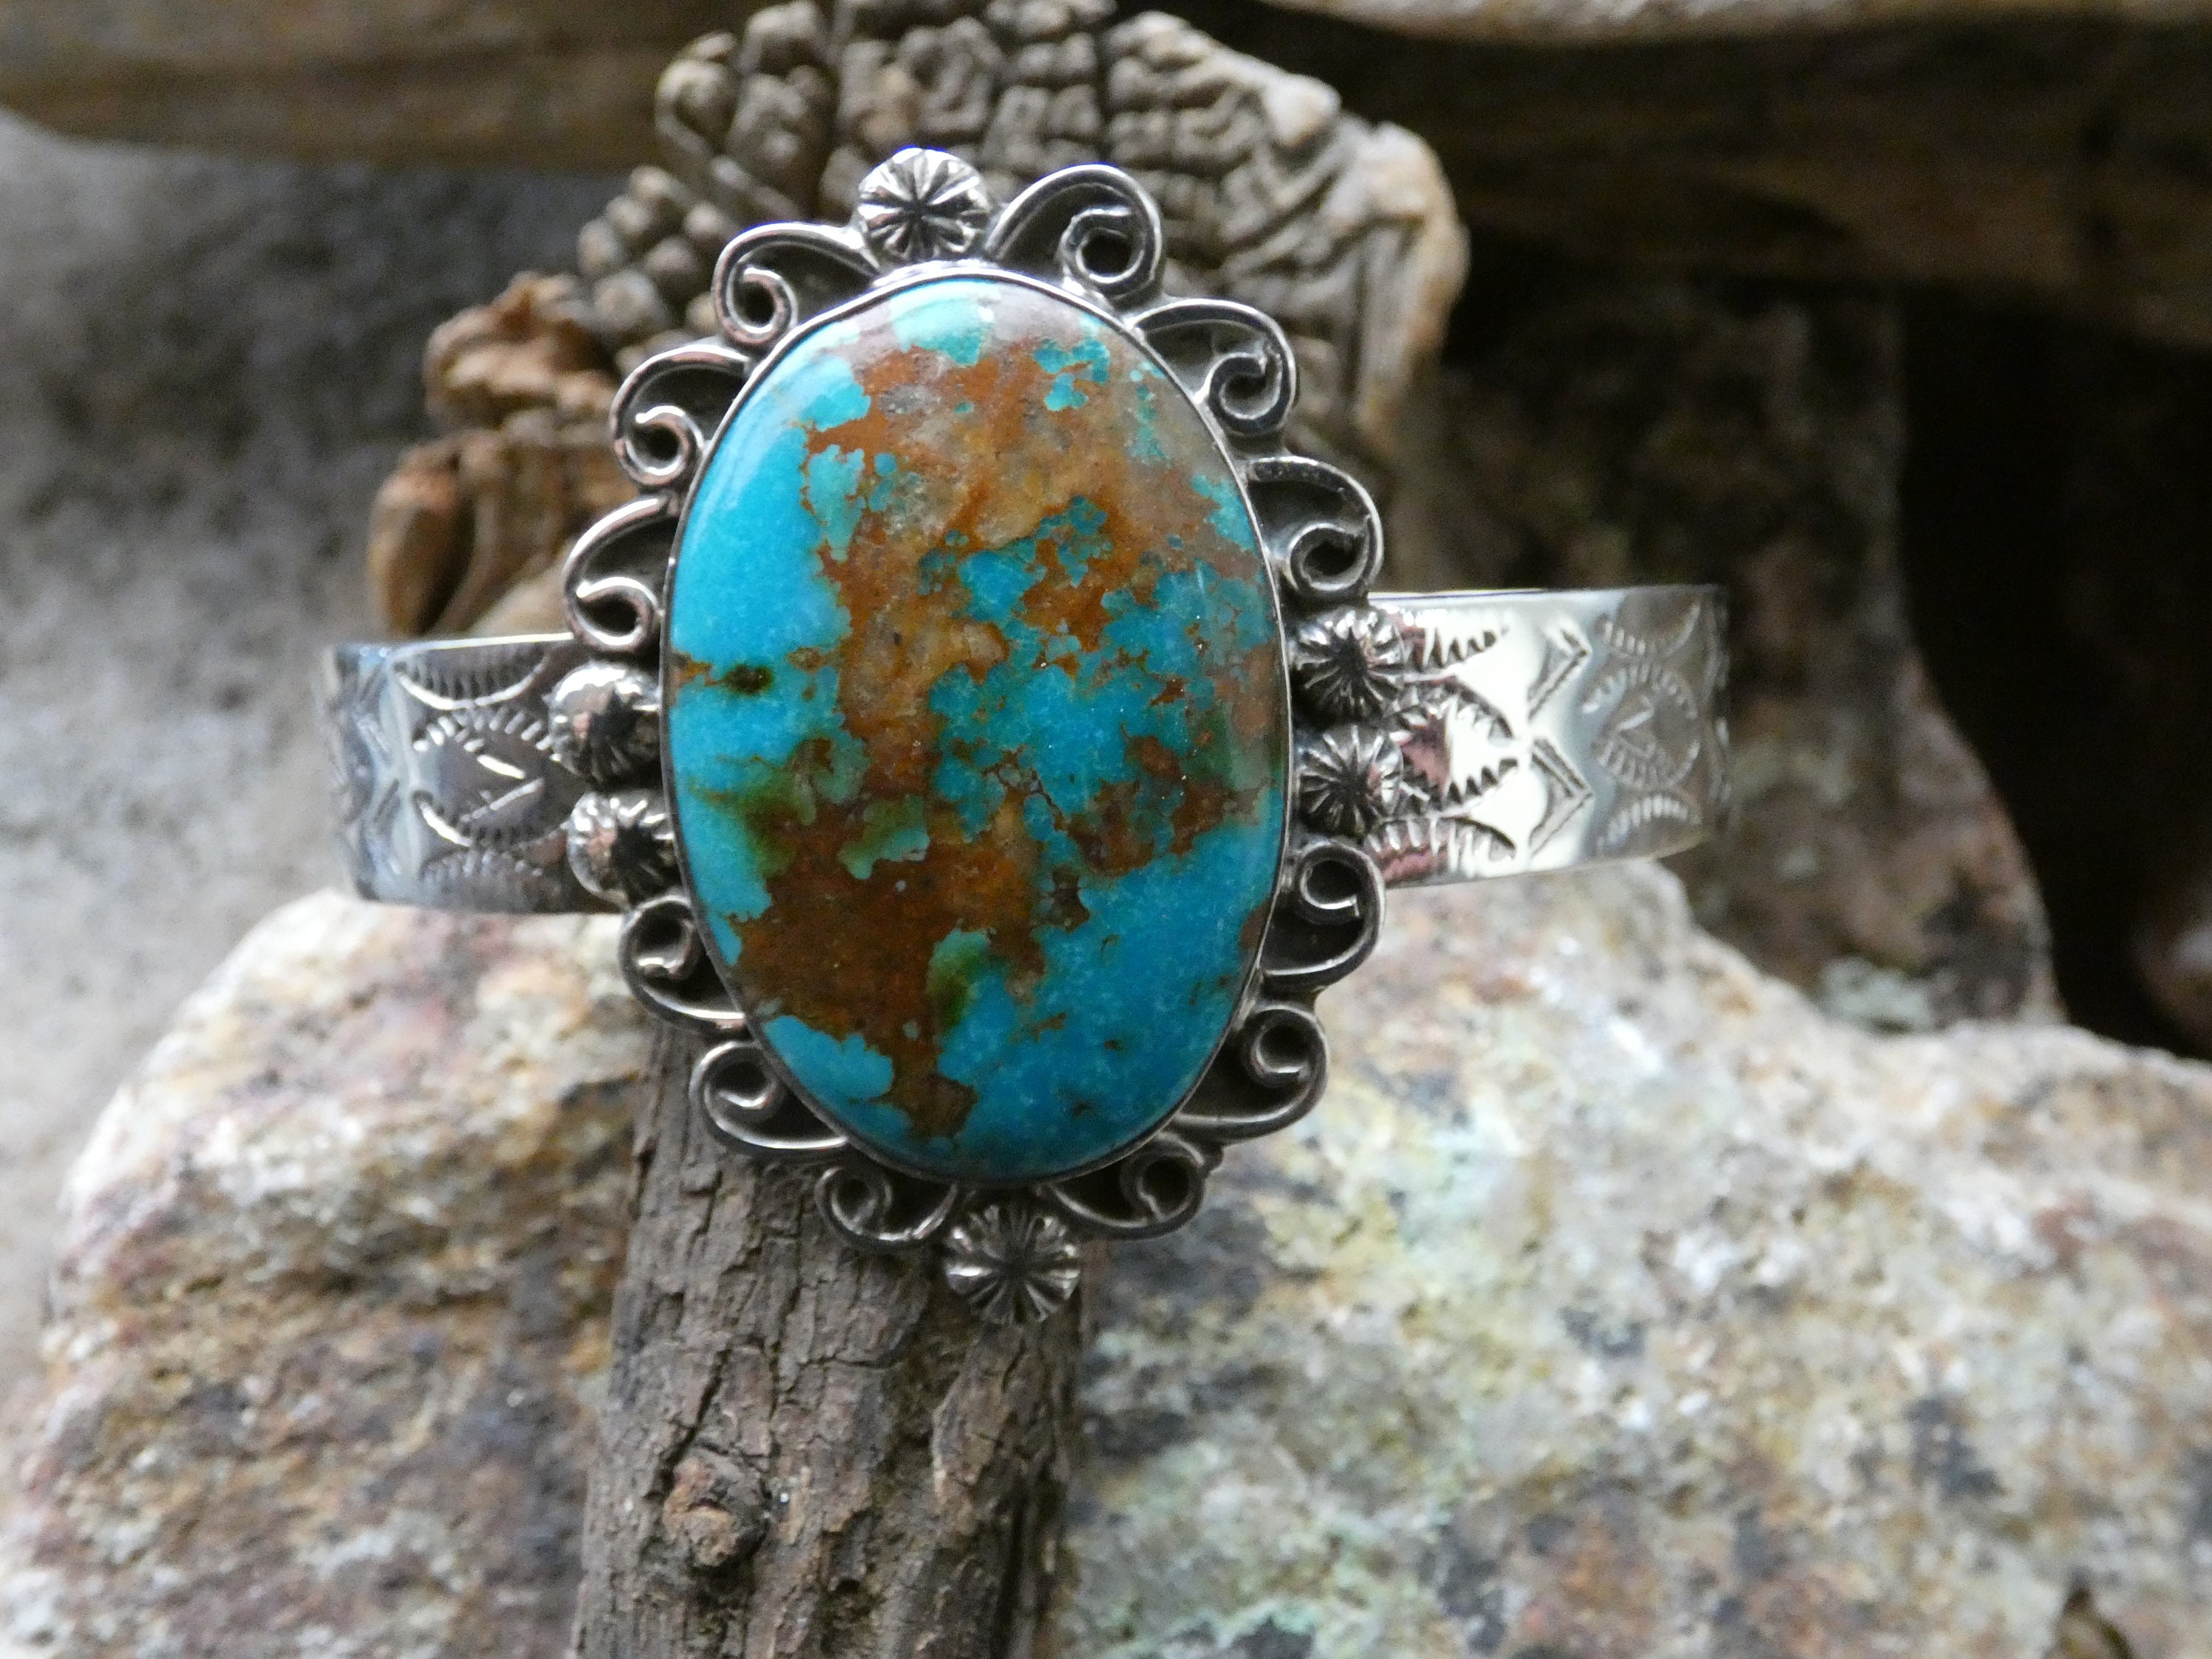 Boulder Turquoise Handcrafted Hand Stamped Sterling Silver 925 Southwestern Western Layering Bracelet Cuff Free Shipping Gift Box NEW K26thumbnail